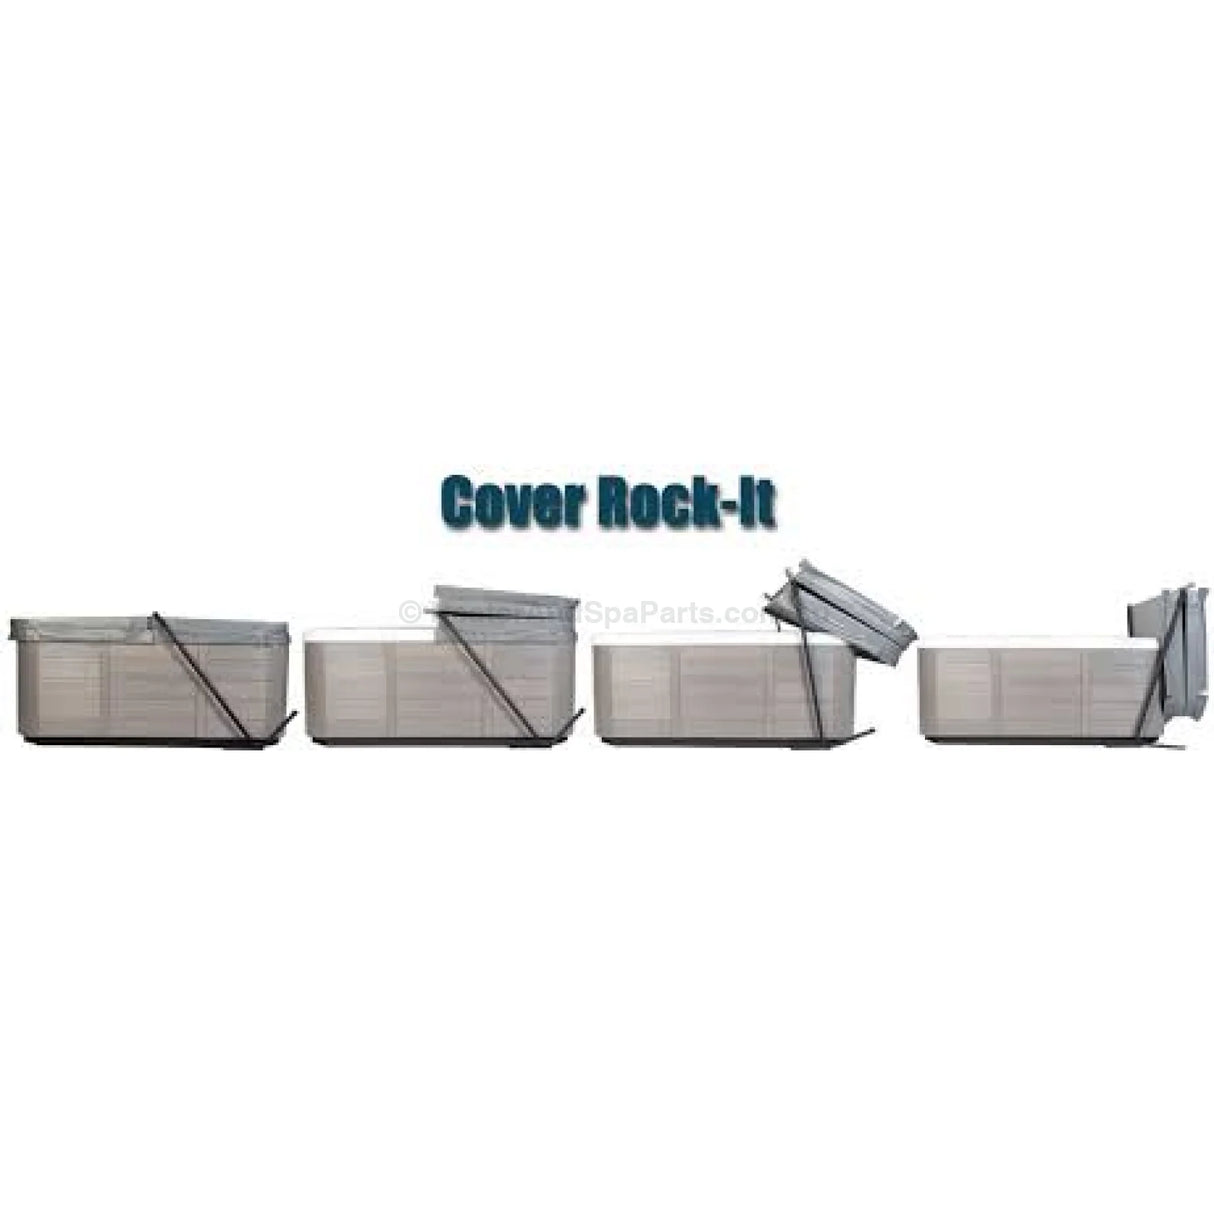 Spa Cover Lifter - Cover Rock-It for Spas up to 2450mm - Heater and Spa Parts